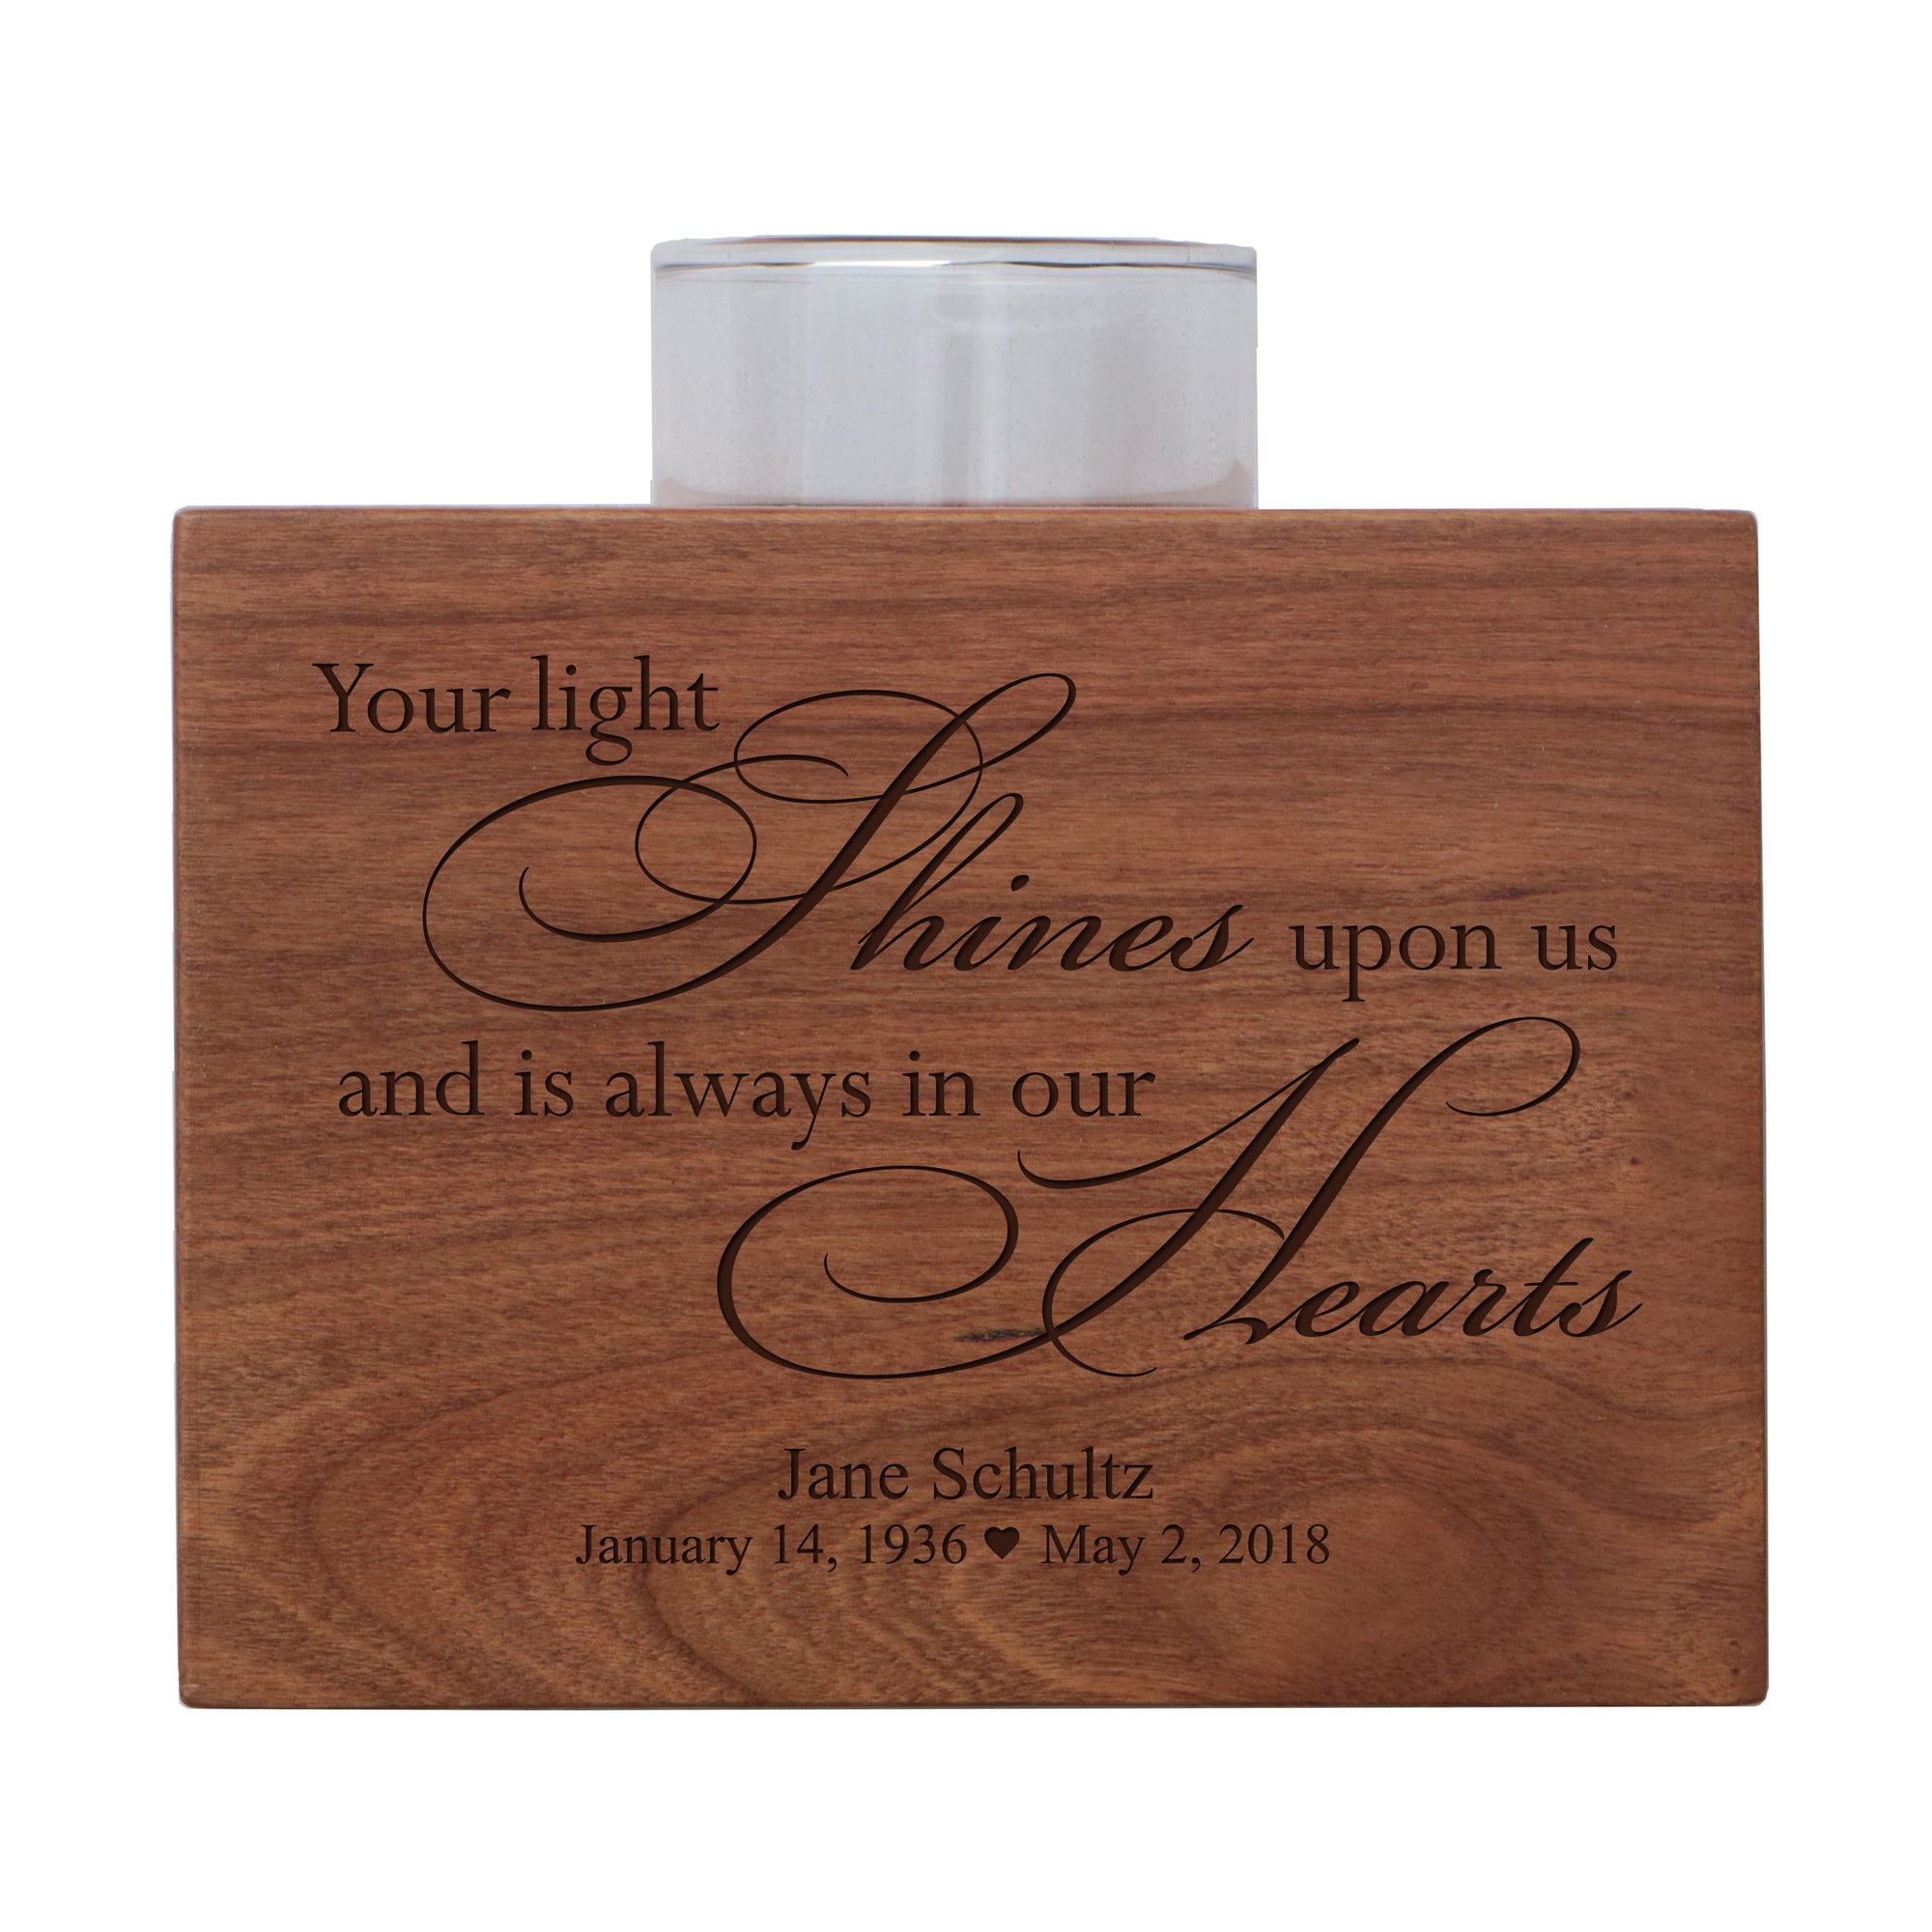 Personalized Memorial sympathy votive candle holder cherry wood keepsake gift ideas for Loved One 3.75” x 3.75” x 2.75” by LifeSong Milestones